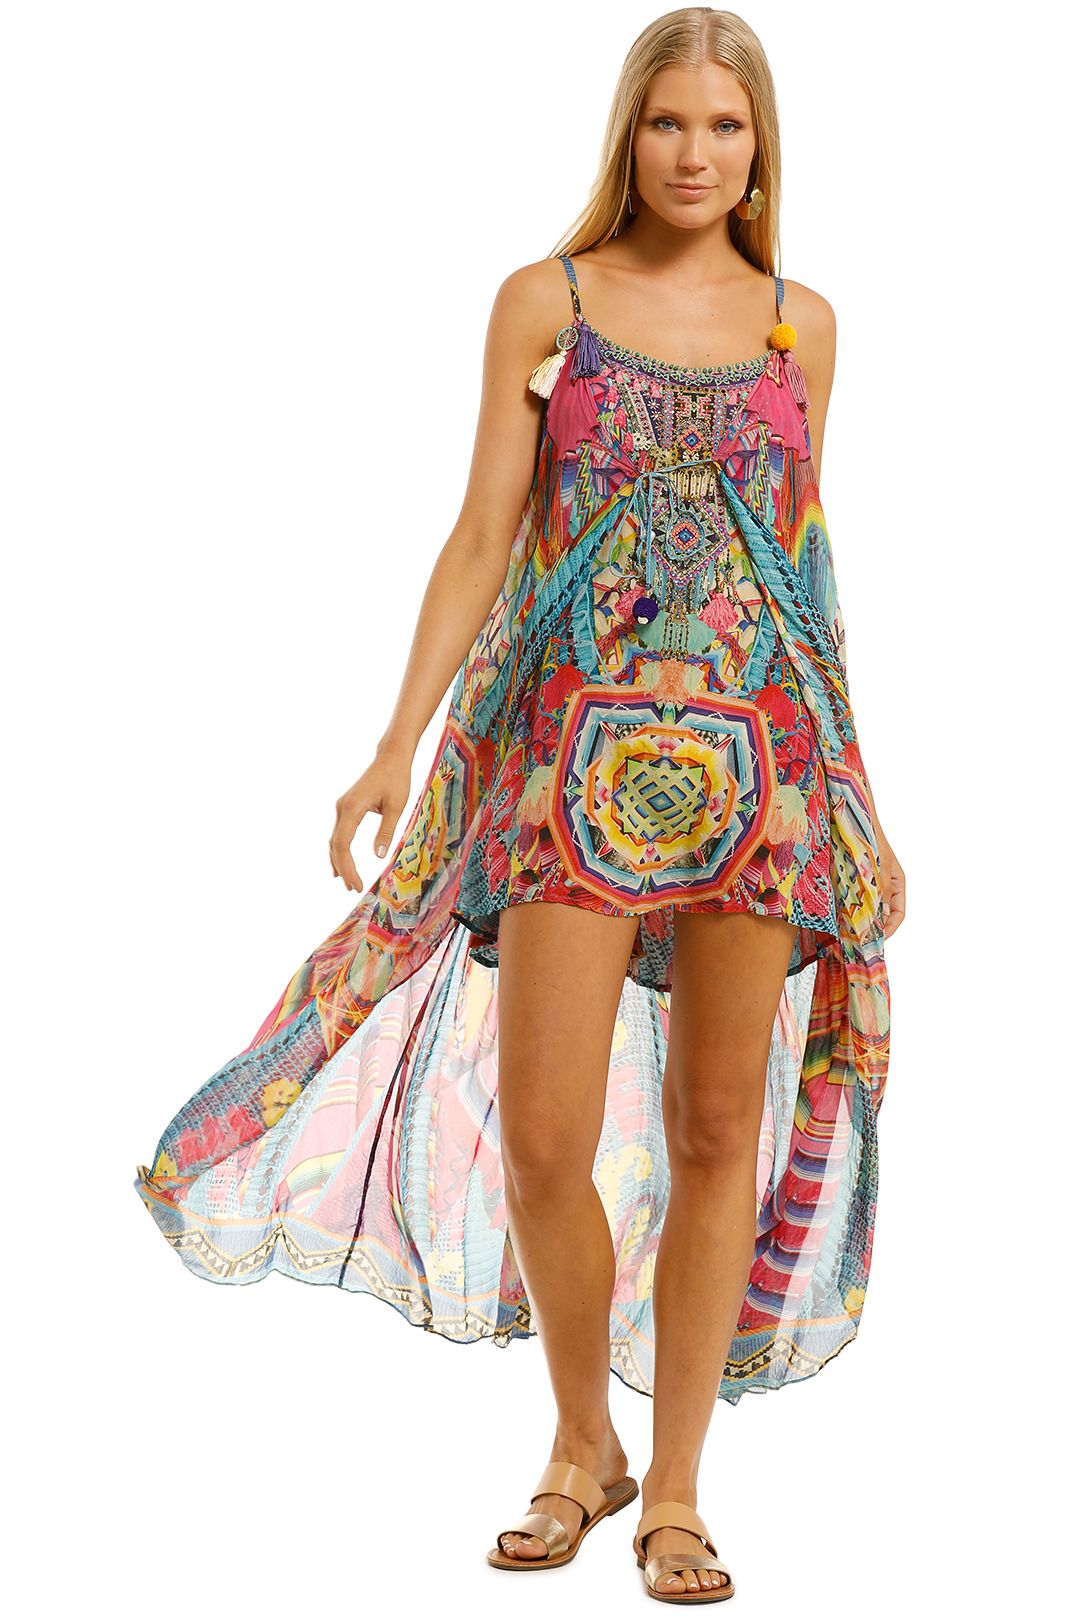 Camilla - Ms Mochilla Mini Dress with Long Overlay - Prints - Front